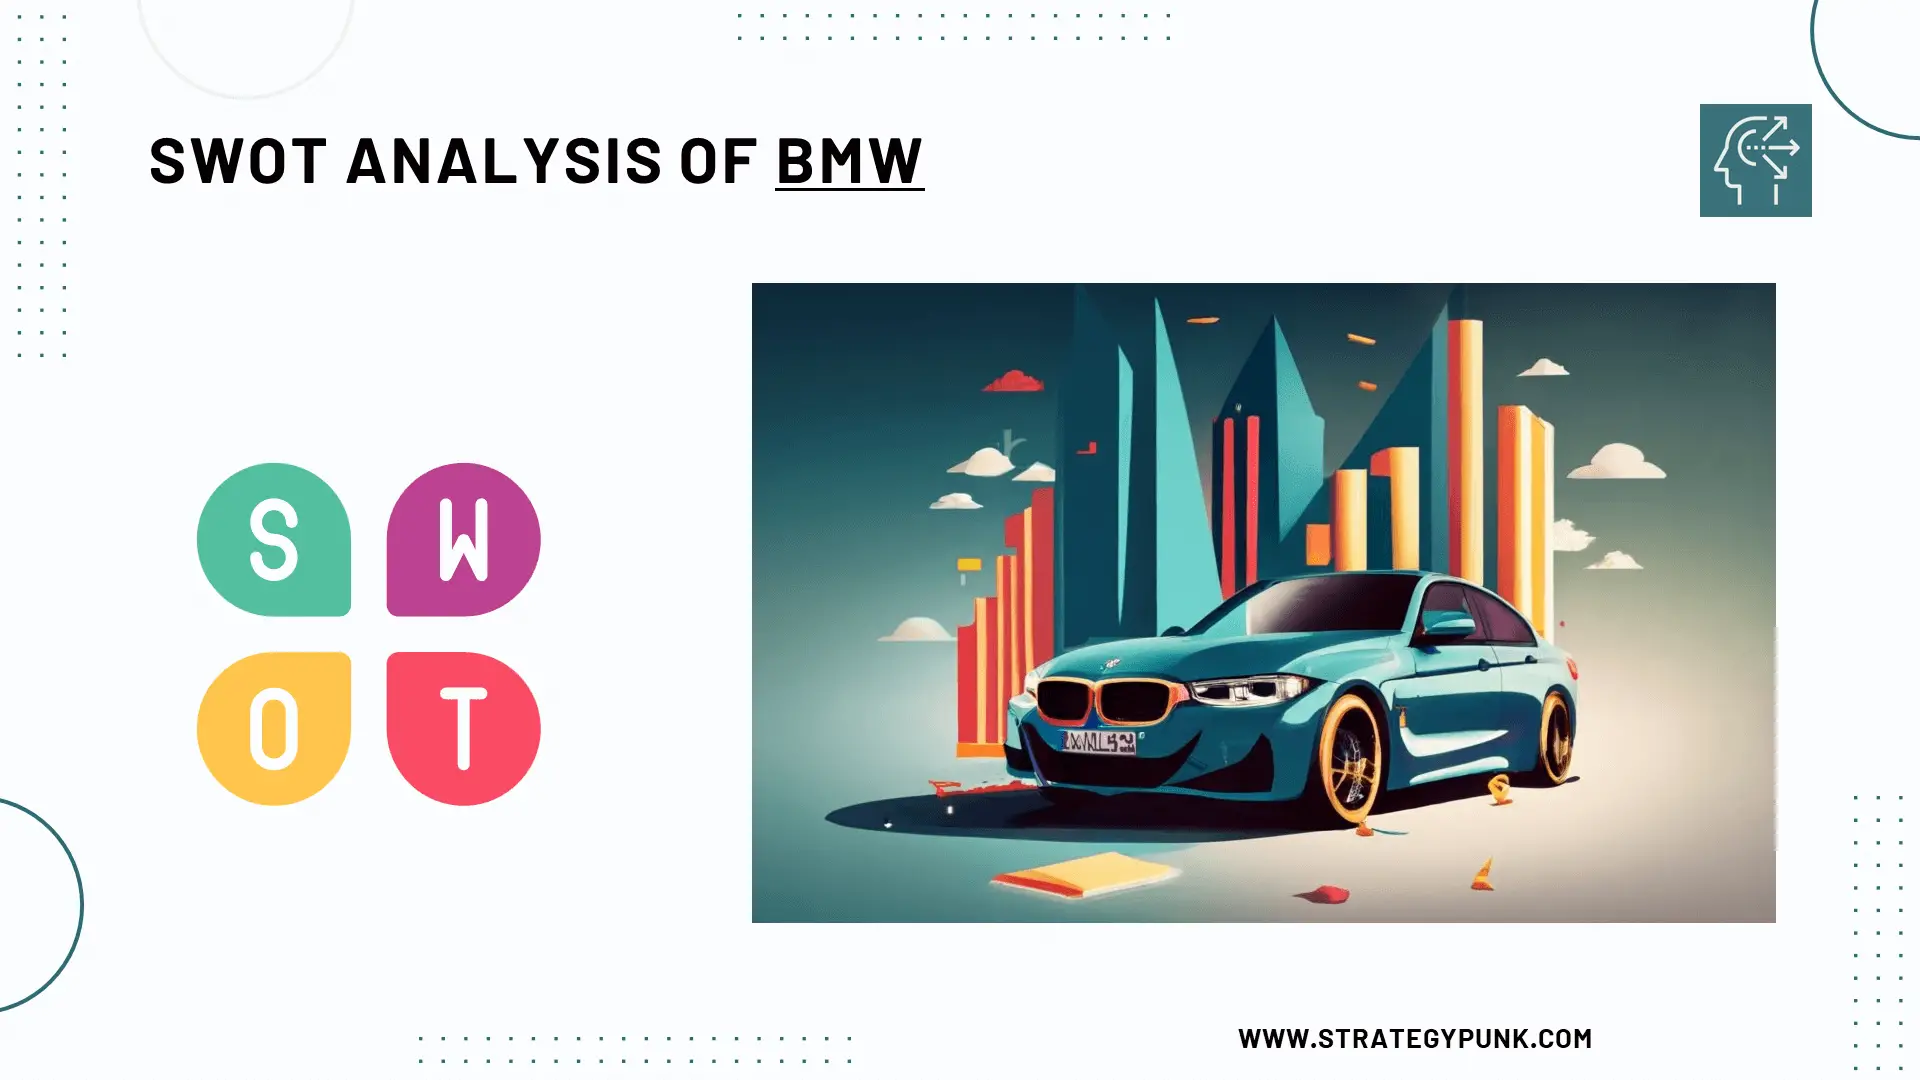 SWOT Analysis of BMW: Free PPT Template and In-Depth Insights 2023